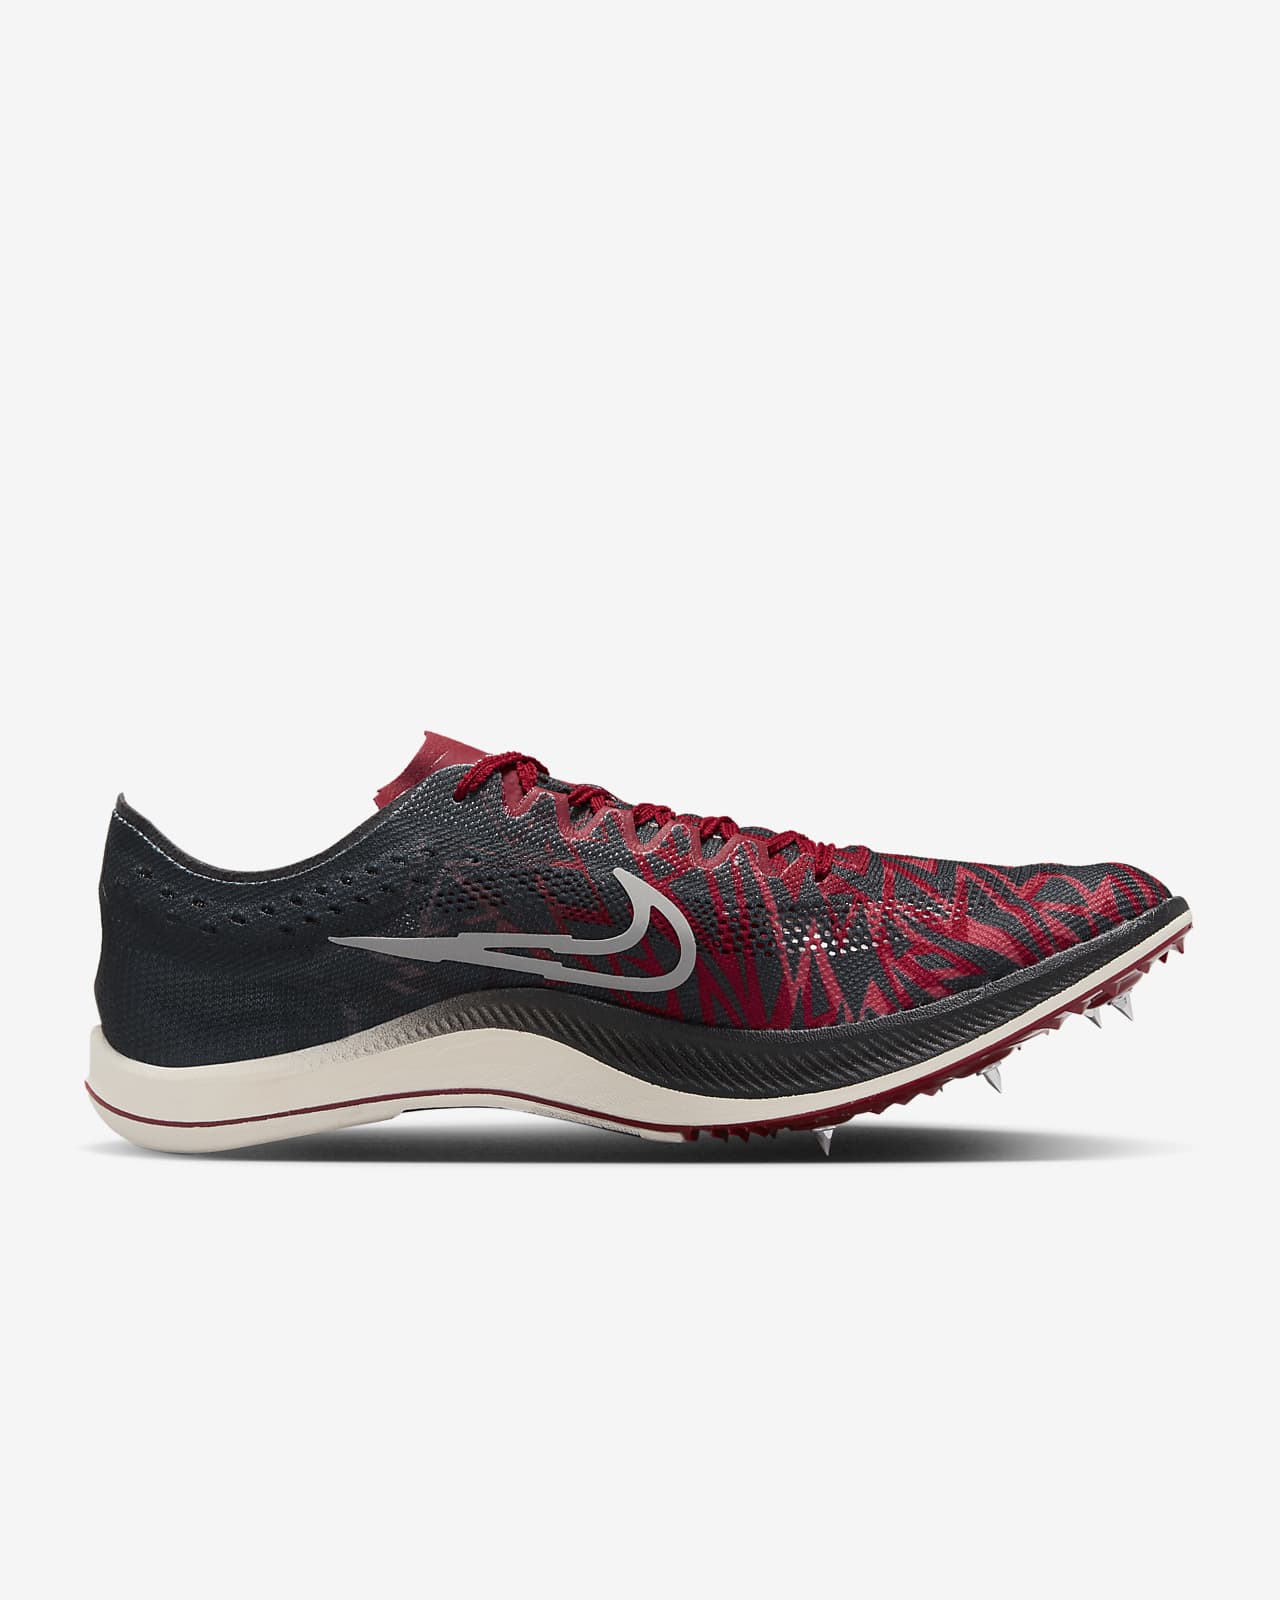 Nike ZoomX Dragonfly Bowerman Track Club Athletics Distance Spikes